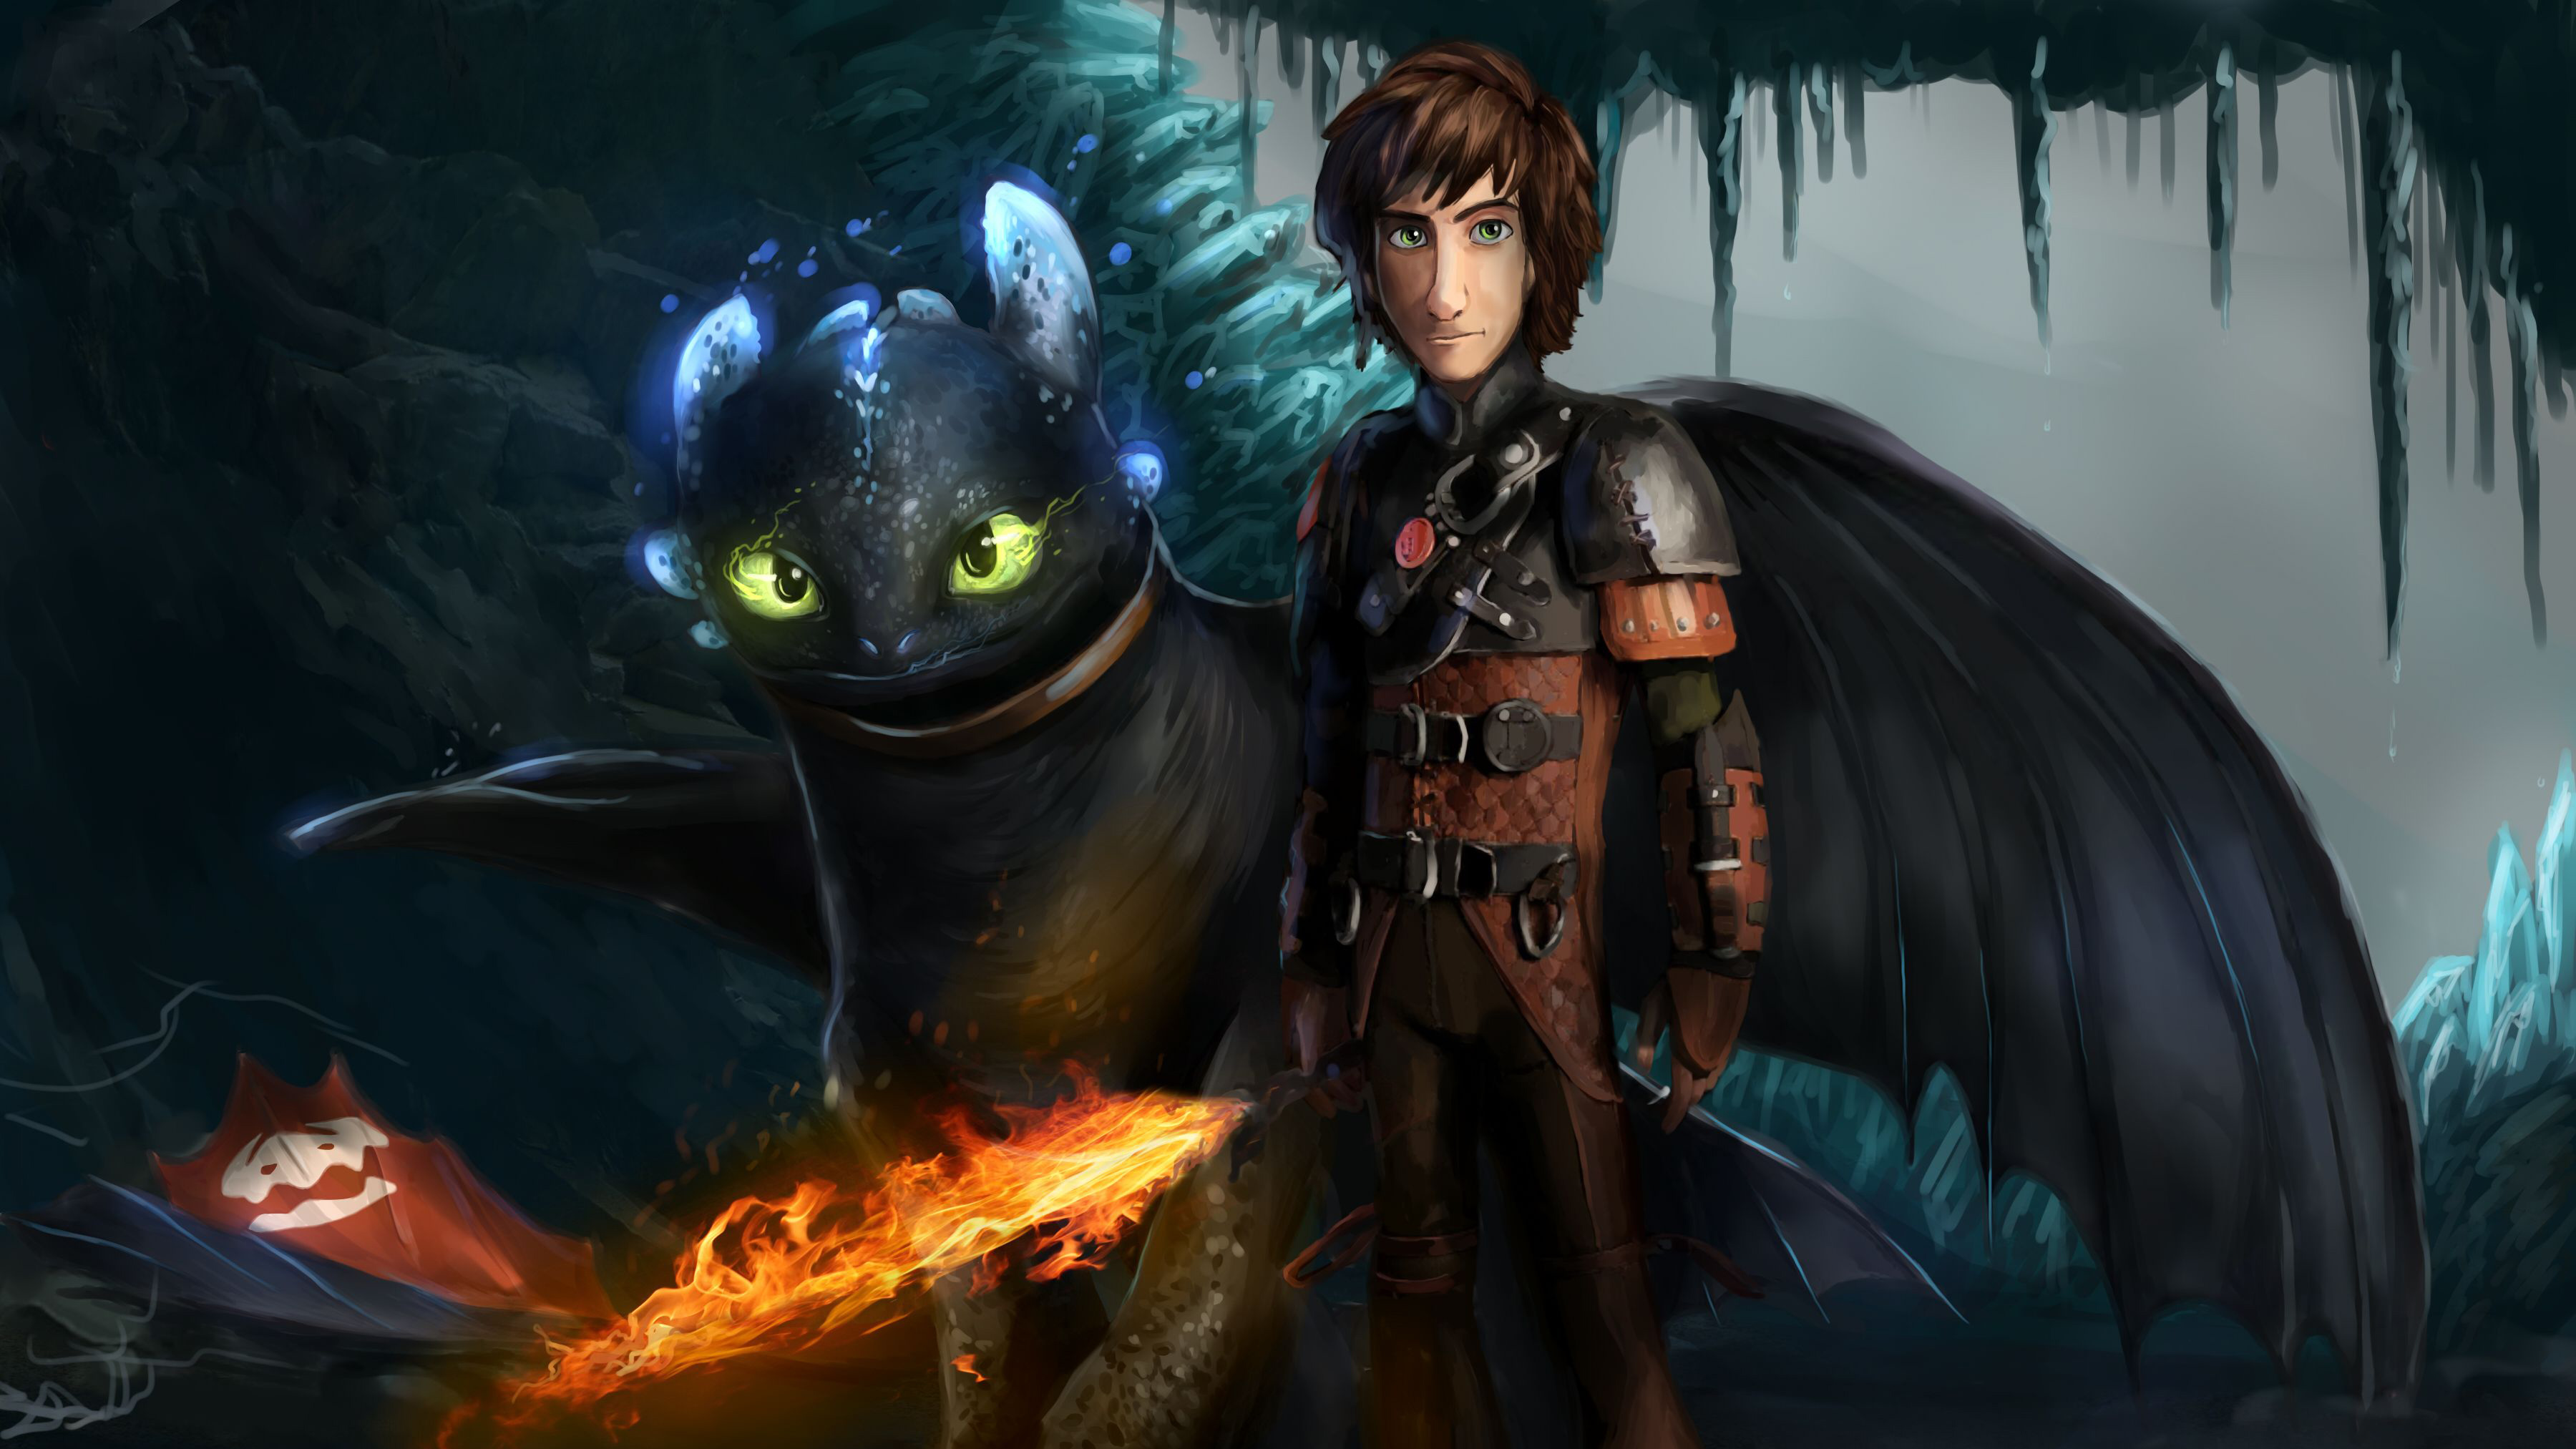 How To Train Your Dragon The Hidden World Art, HD Movies, 4k Wallpaper, Image, Background, Photo and Picture